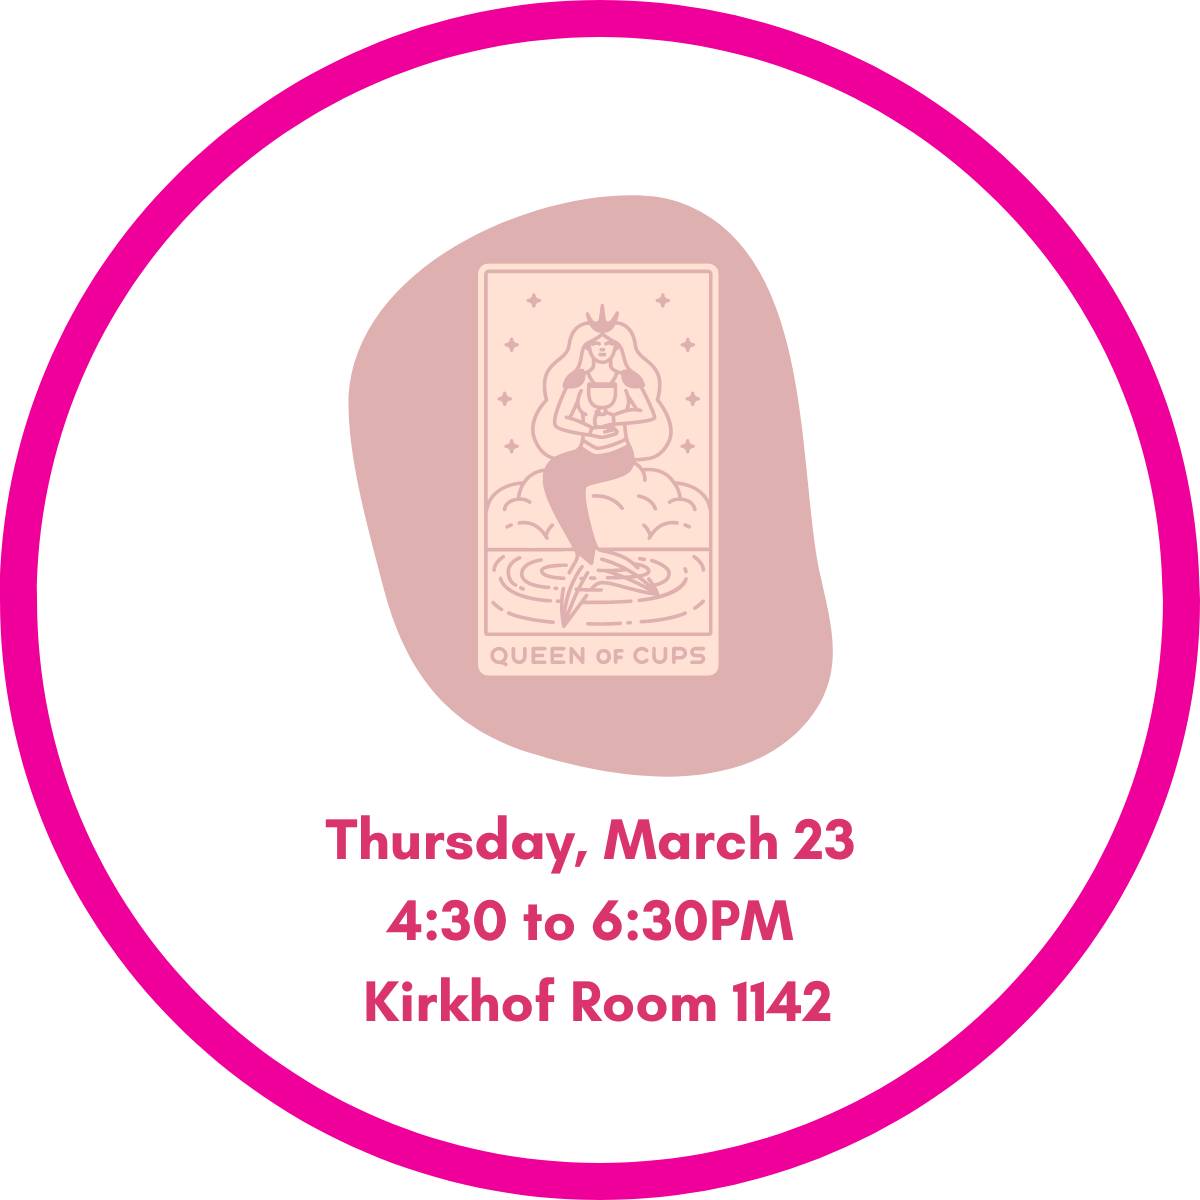 Fill Your Cup Sis on Thursday, March 23rd 4:30 to 6:30pm in Kirkhof Room 1142.